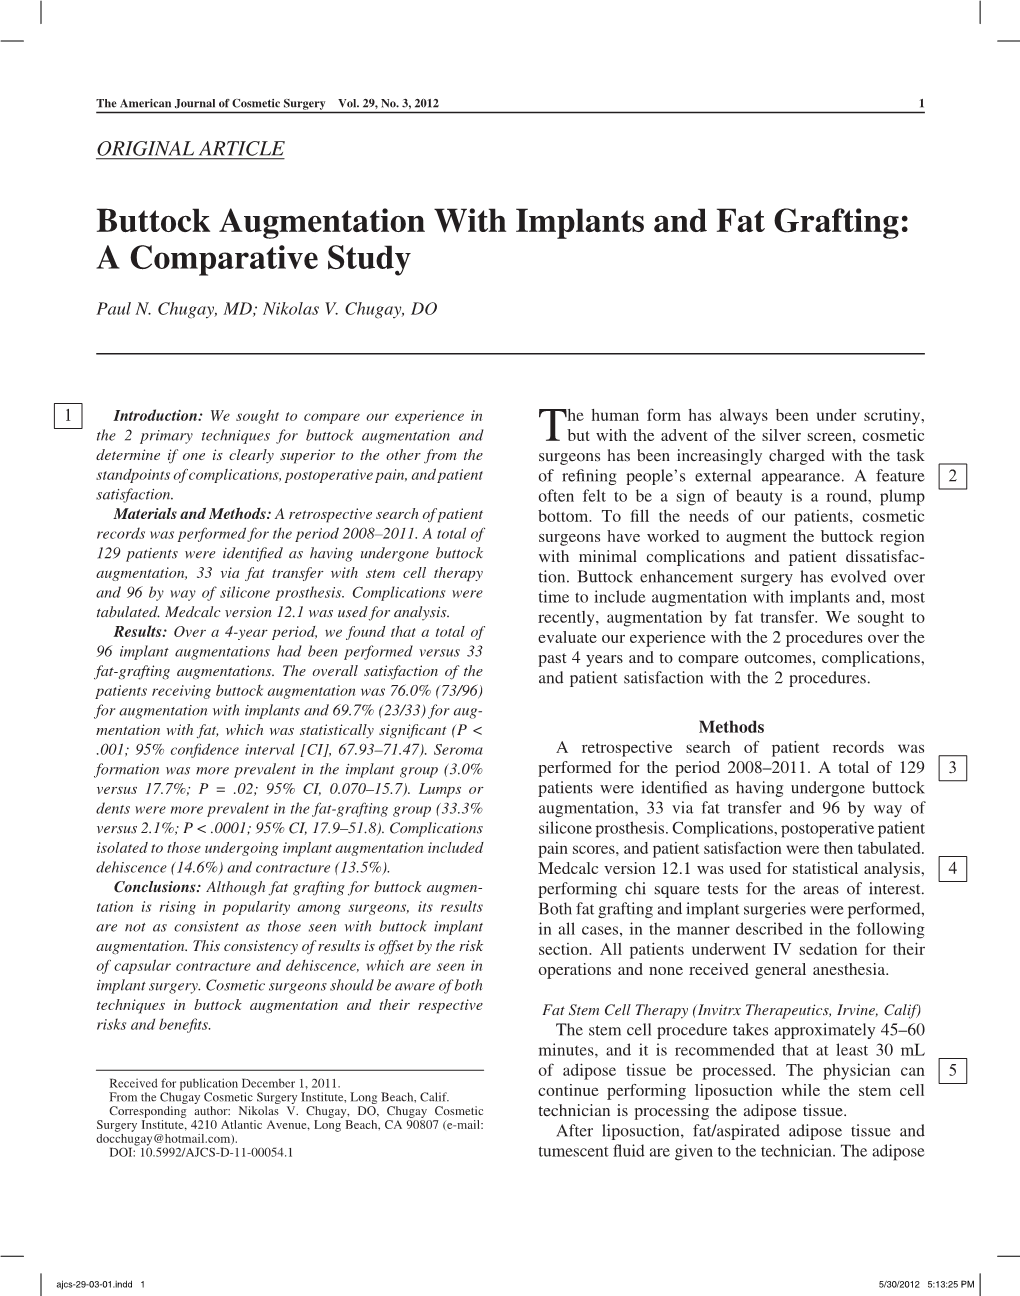 Buttock Augmentation with Implants and Fat Grafting: a Comparative Study